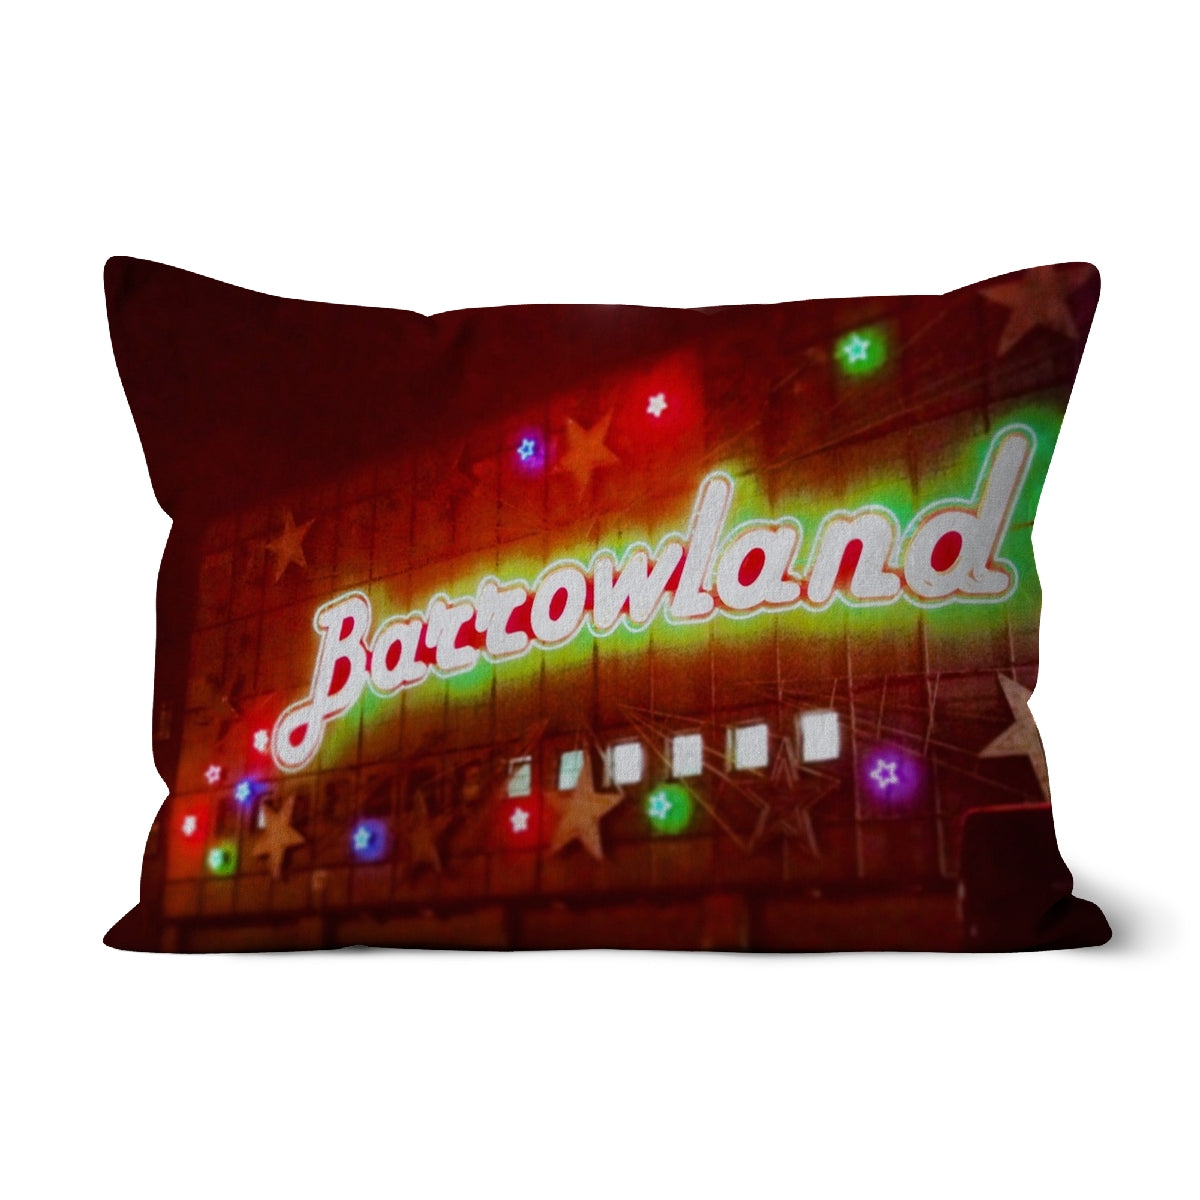 A Neon Glasgow Barrowlands Art Gifts Cushion-Cushions-Edinburgh & Glasgow Art Gallery-Faux Suede-19"x13"-Paintings, Prints, Homeware, Art Gifts From Scotland By Scottish Artist Kevin Hunter